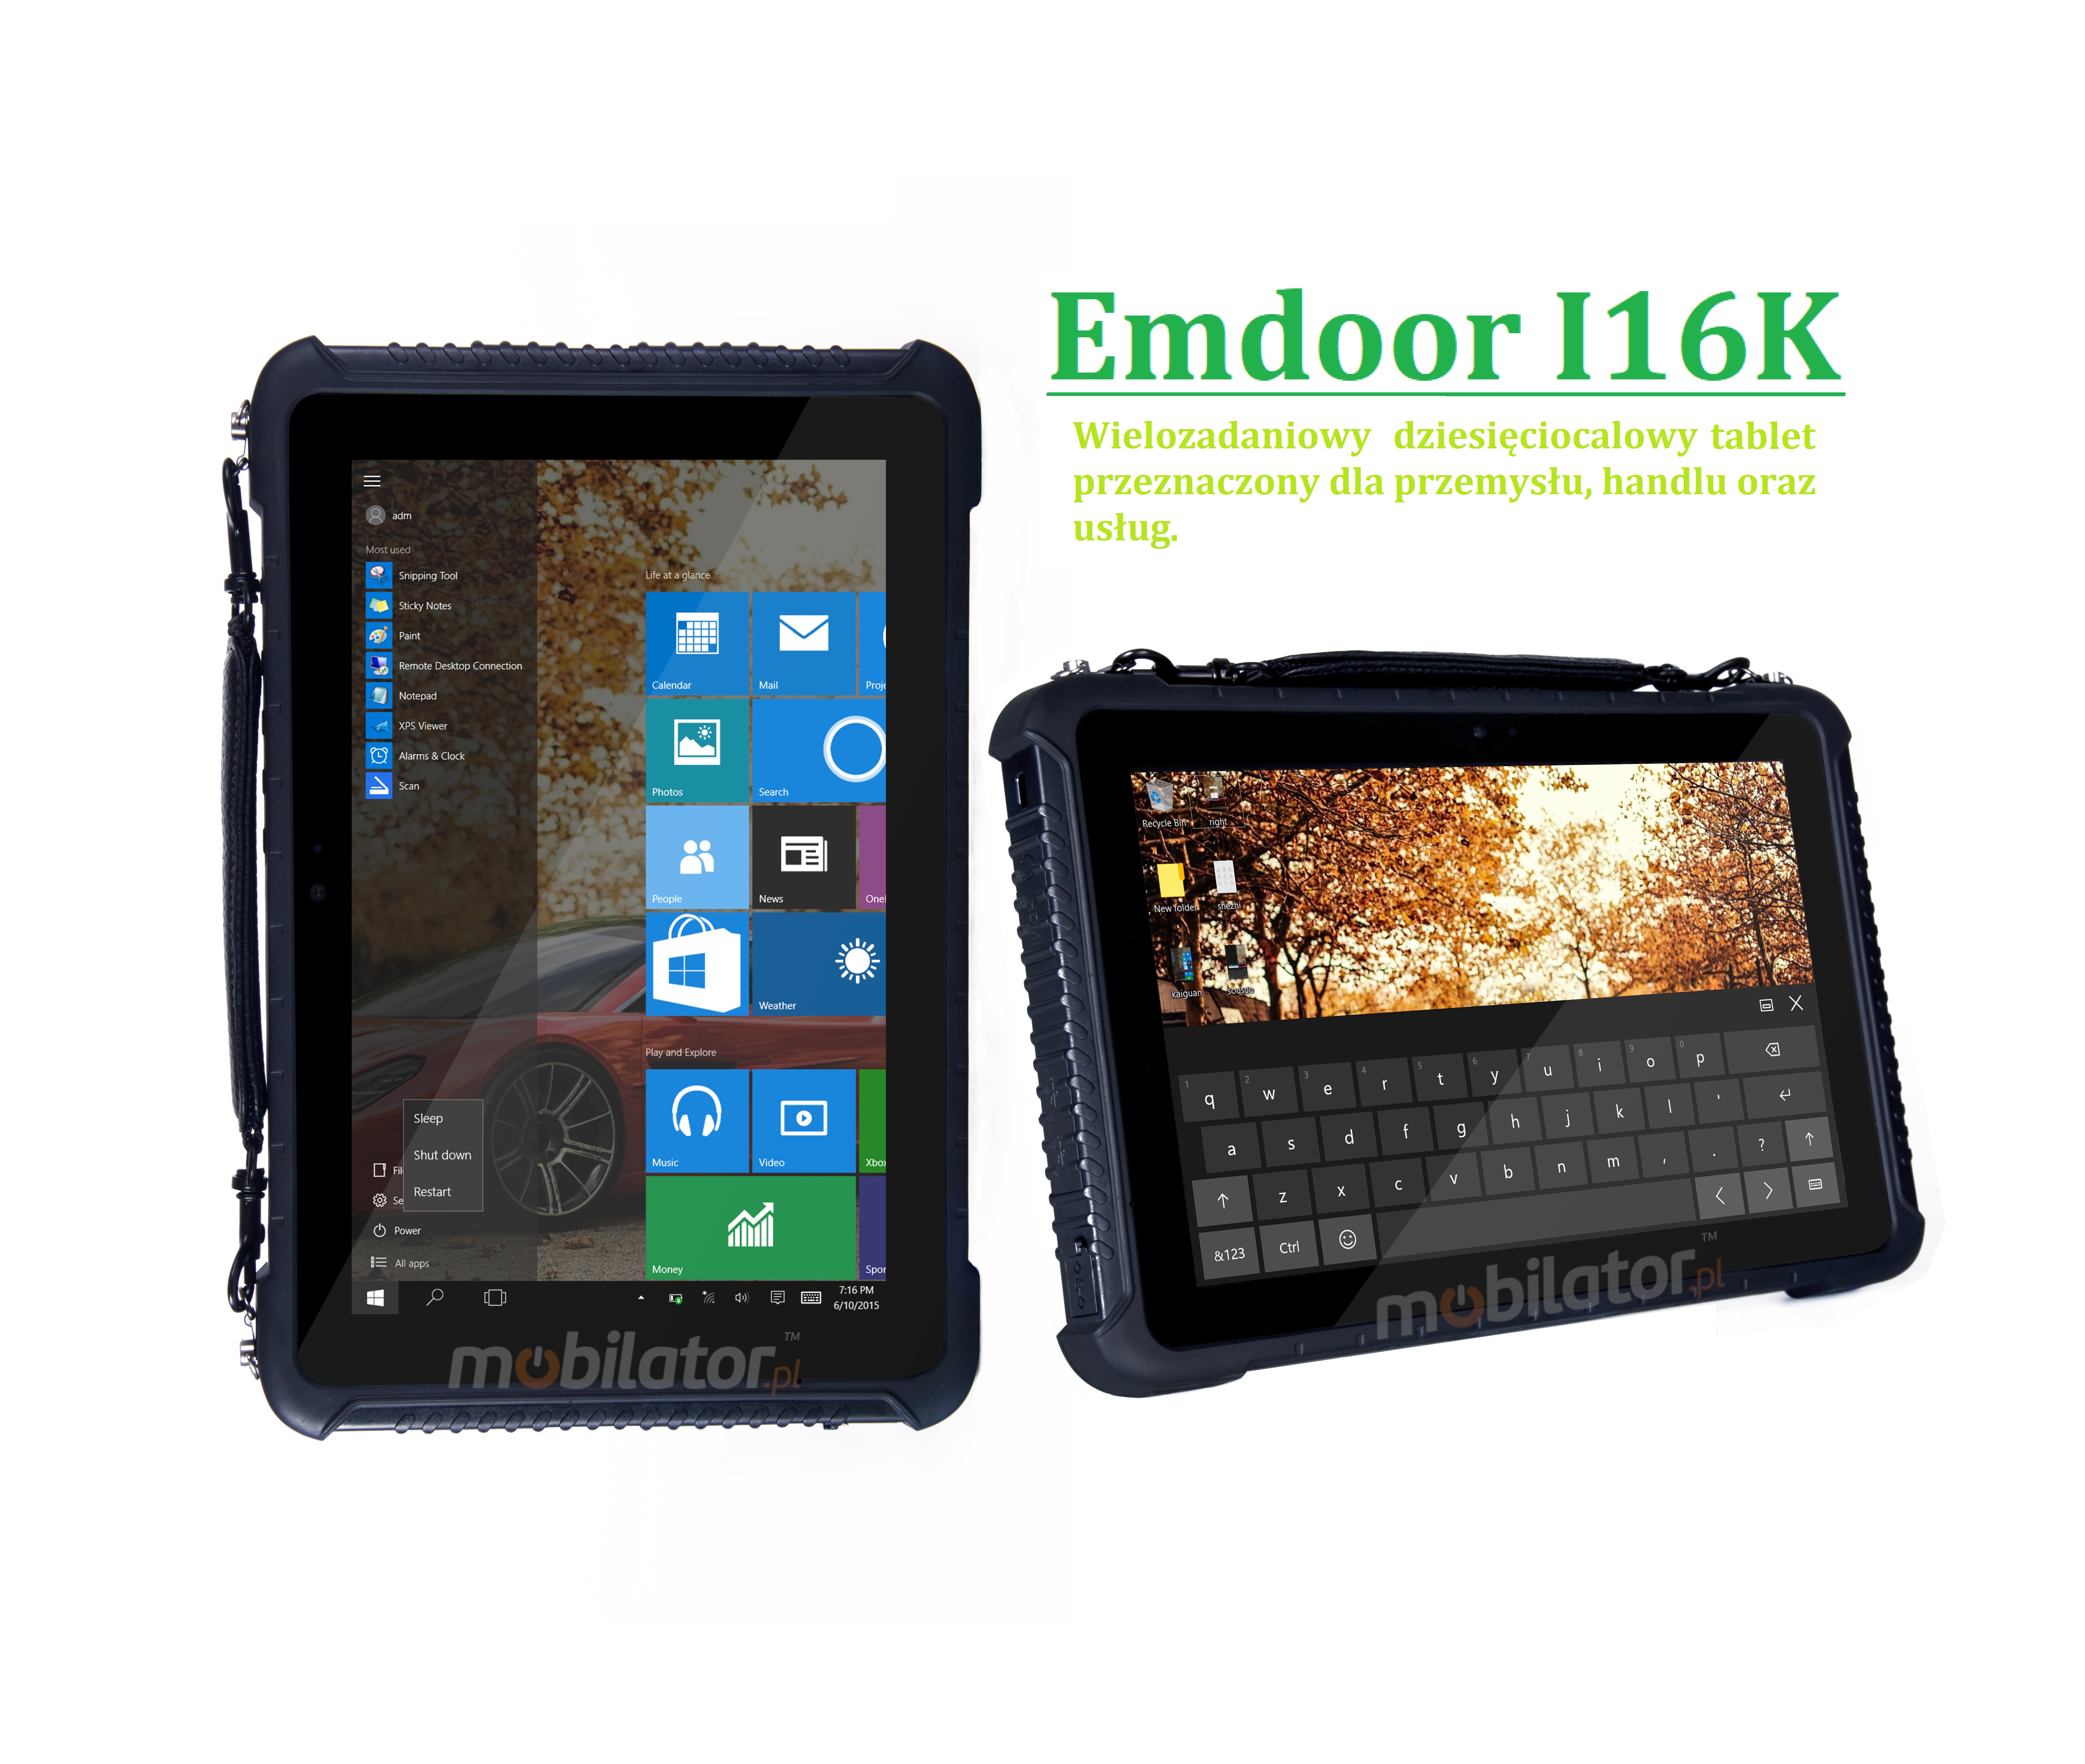 Emdoor I16K v.8 - Industrial 10-inch tablet with IP65 standard, fast processor, 4G, Bluetooth, 4GB RAM, 128GB ROM disk and 1D MOTO code scanner 